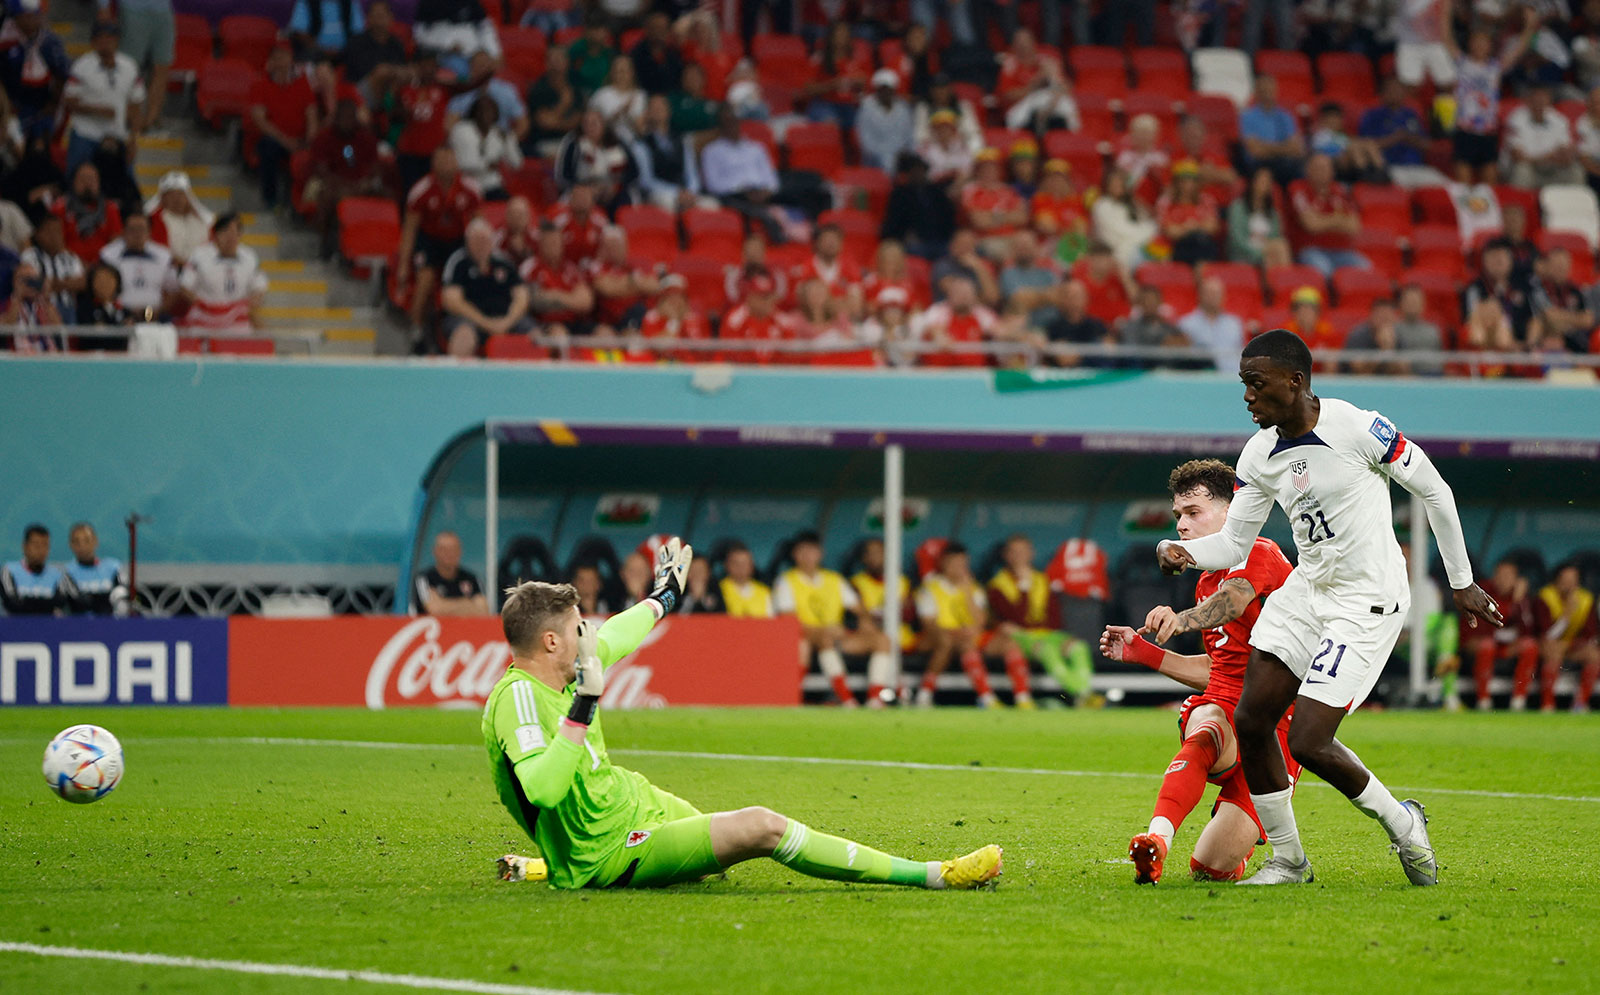 USA's Timothy Weah scores the first goal of the match against Wales on November 21.